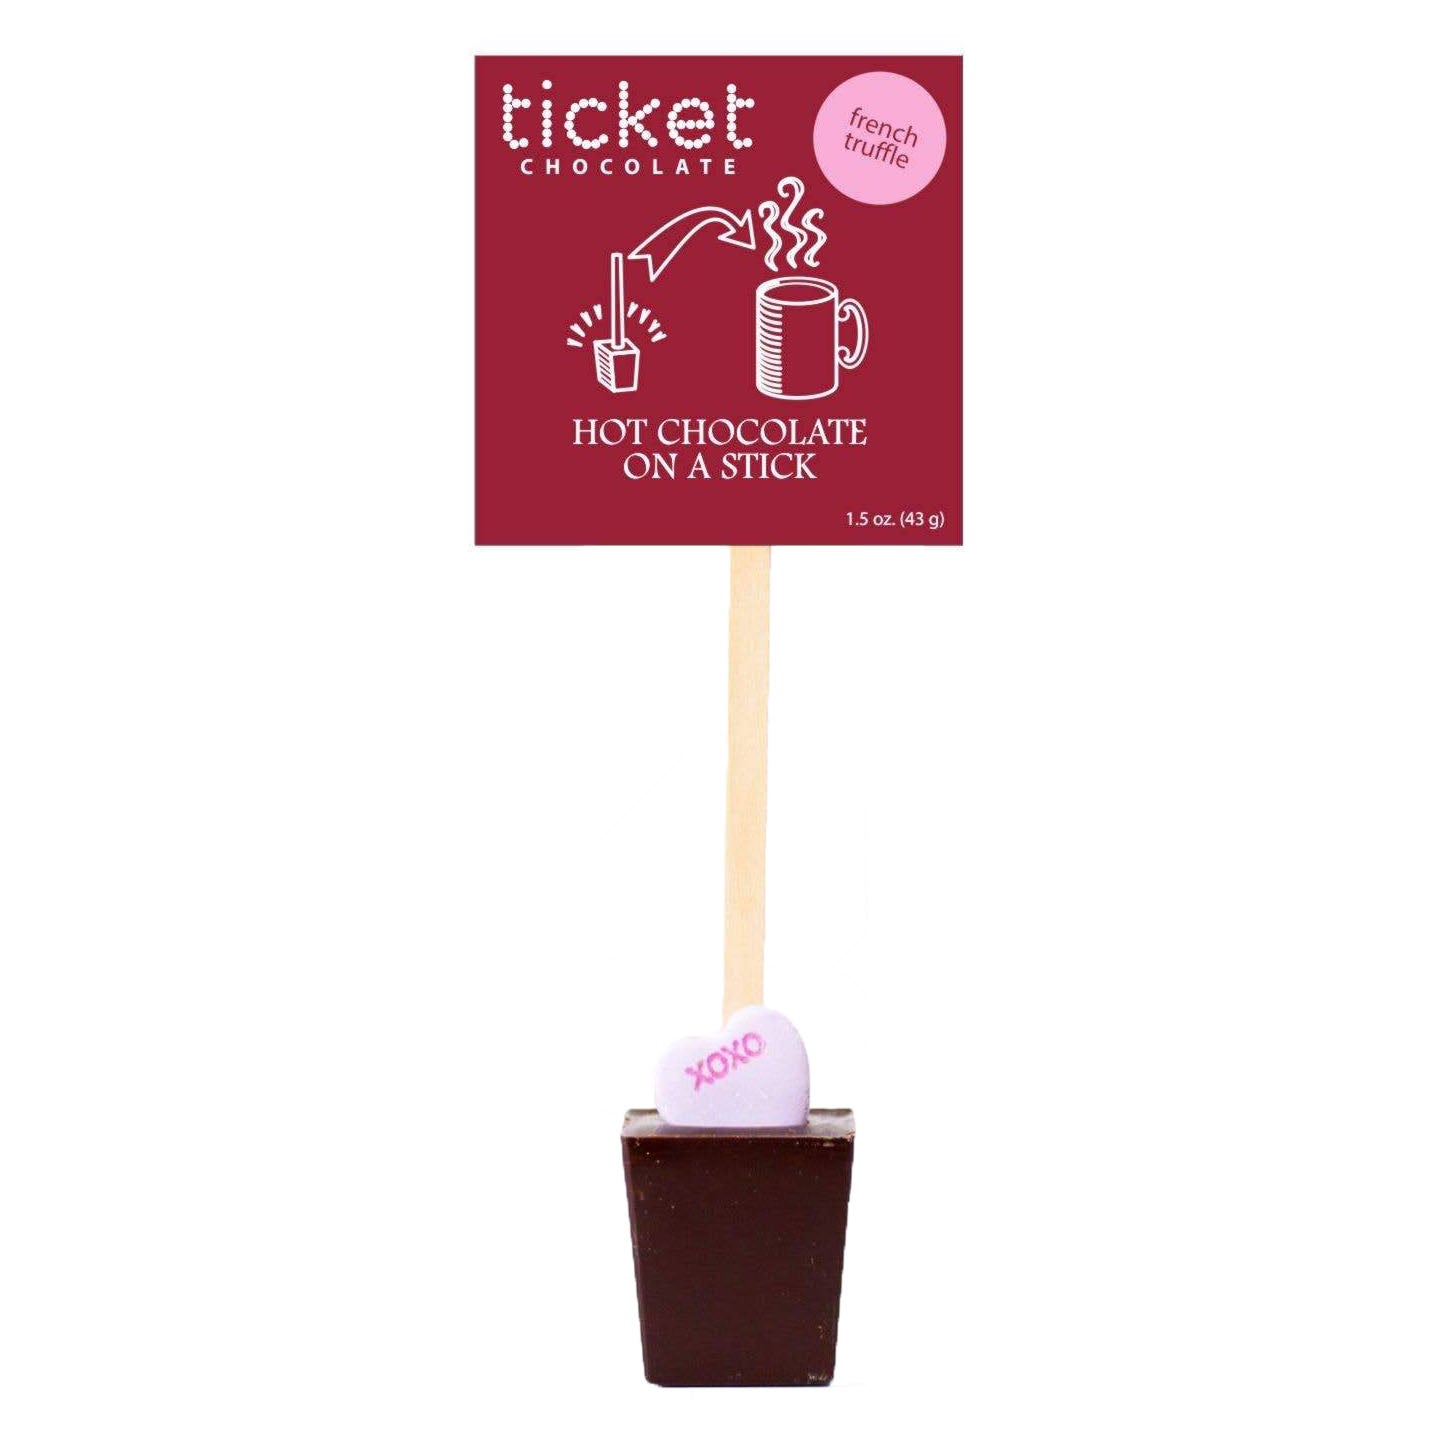 Ticket Chocolate - Hot Chocolate on a Stick (French Truffle) - Valentine Singles